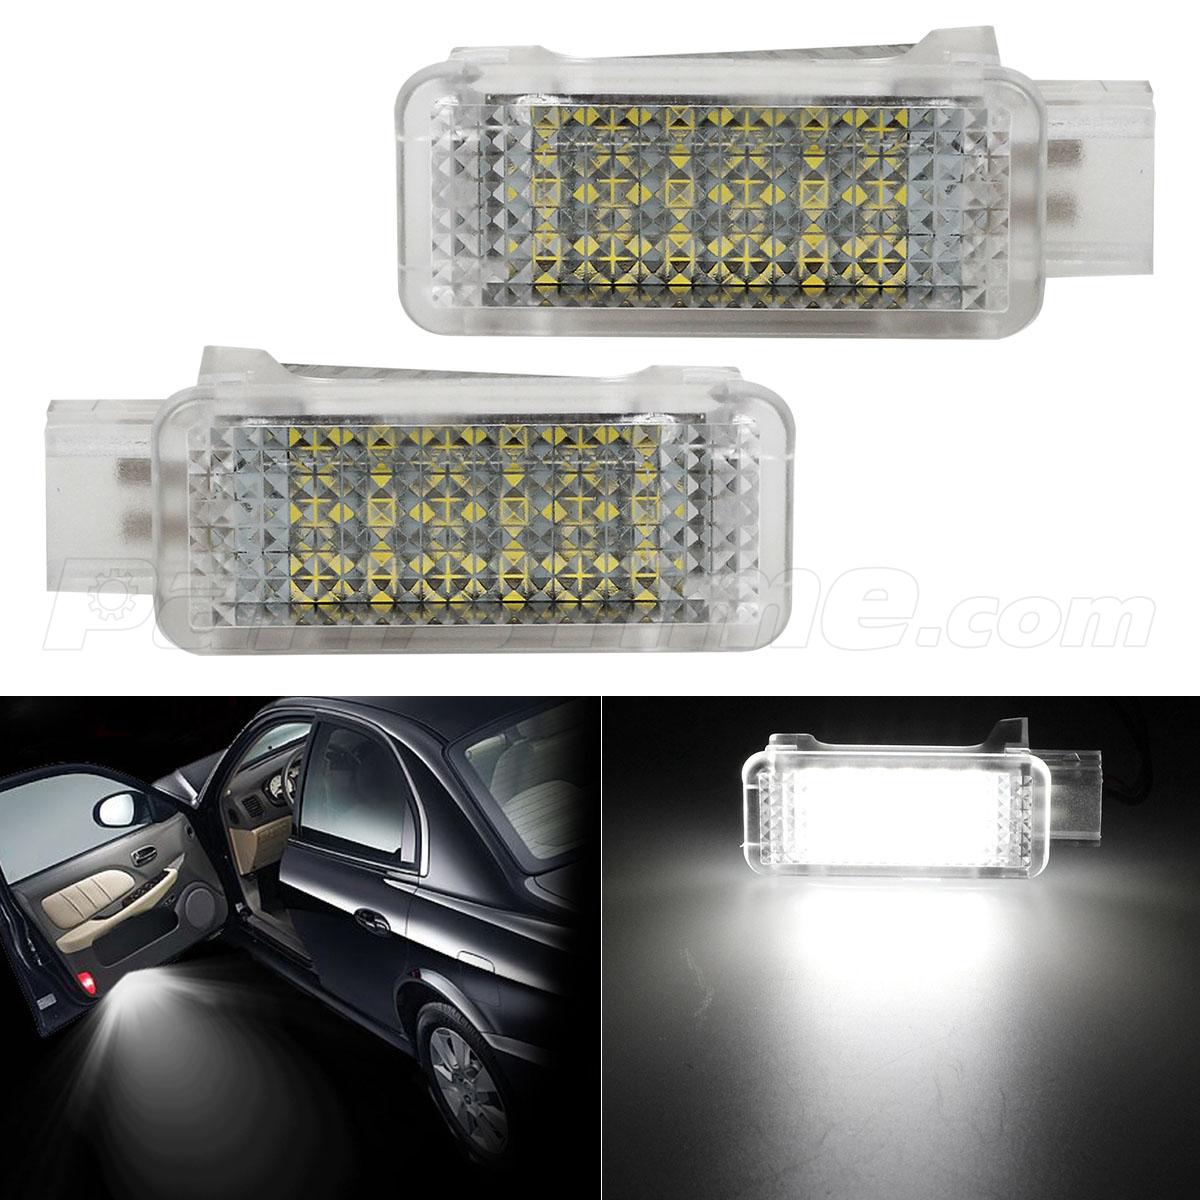 2x White Error Free LED Door Courtesy Puddle Light for Audi A3 A4 A5 A6 A7 A8 eBay